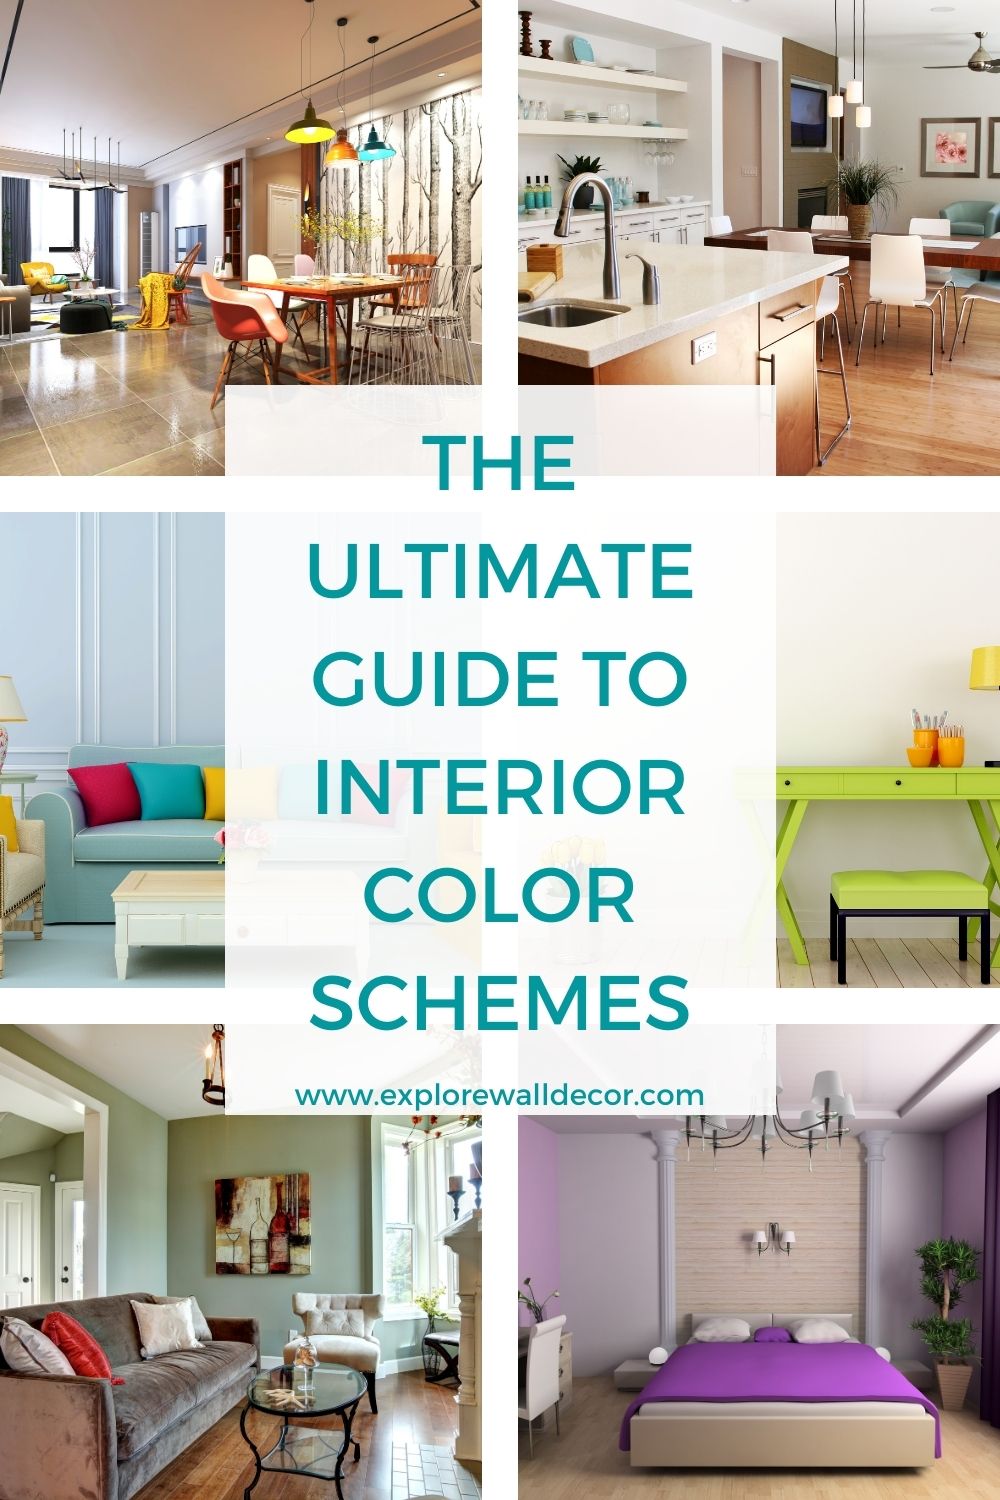 Ultimate Guide to Interior Color Schemes for Houses - Explore Wall Decor